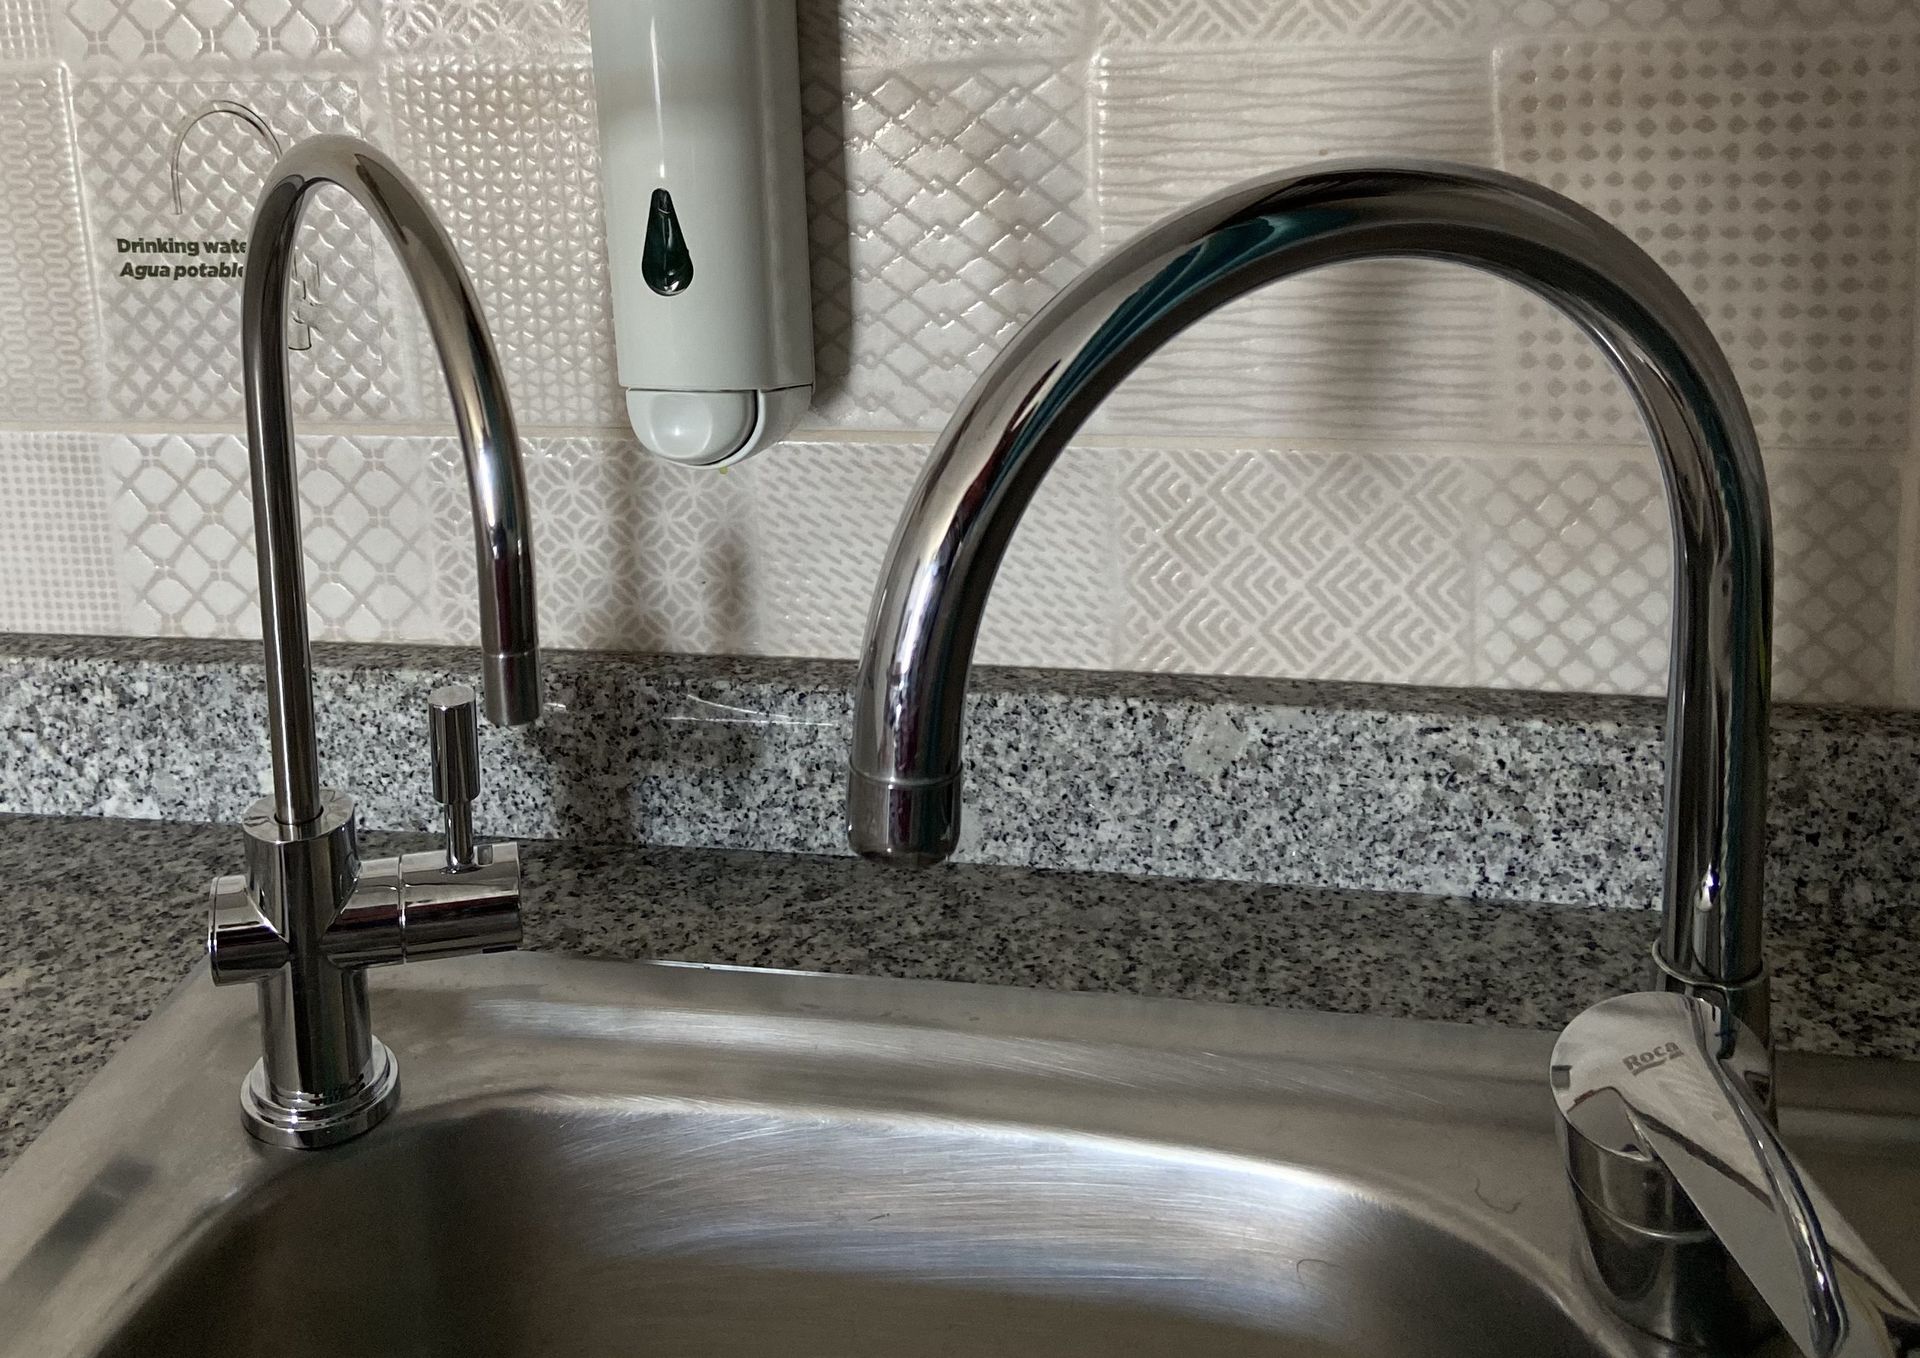 Enjoy freshly filtered water straight from your tap in the sink of your Villa Canaima Apartment